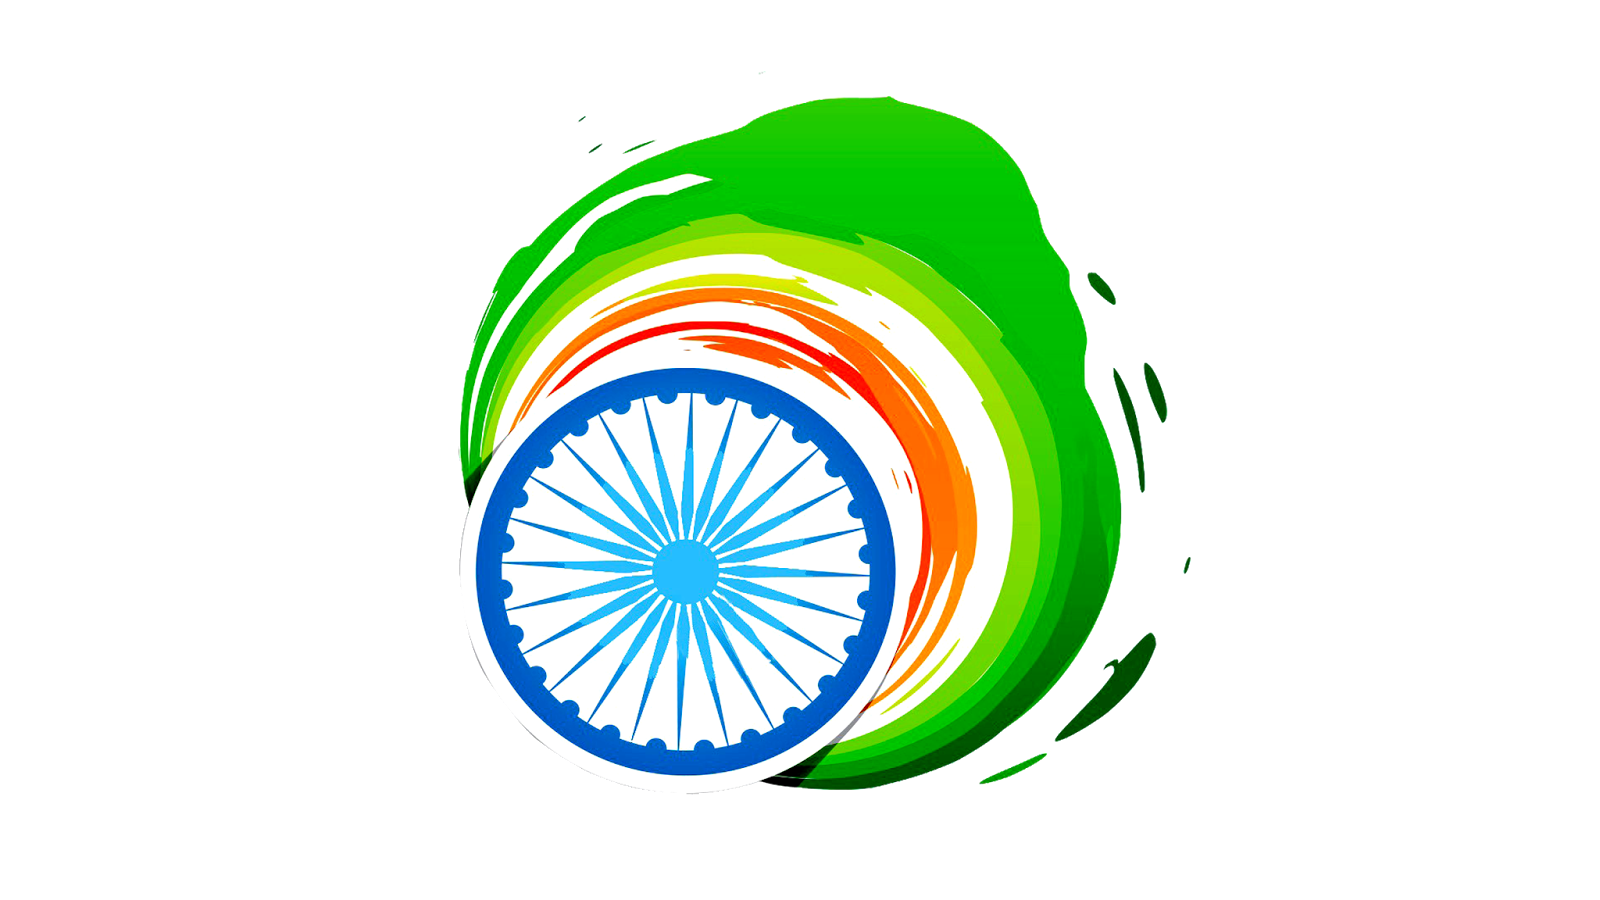 pngforall: Indian round flag Transparent PNG hd wallpapers pics free